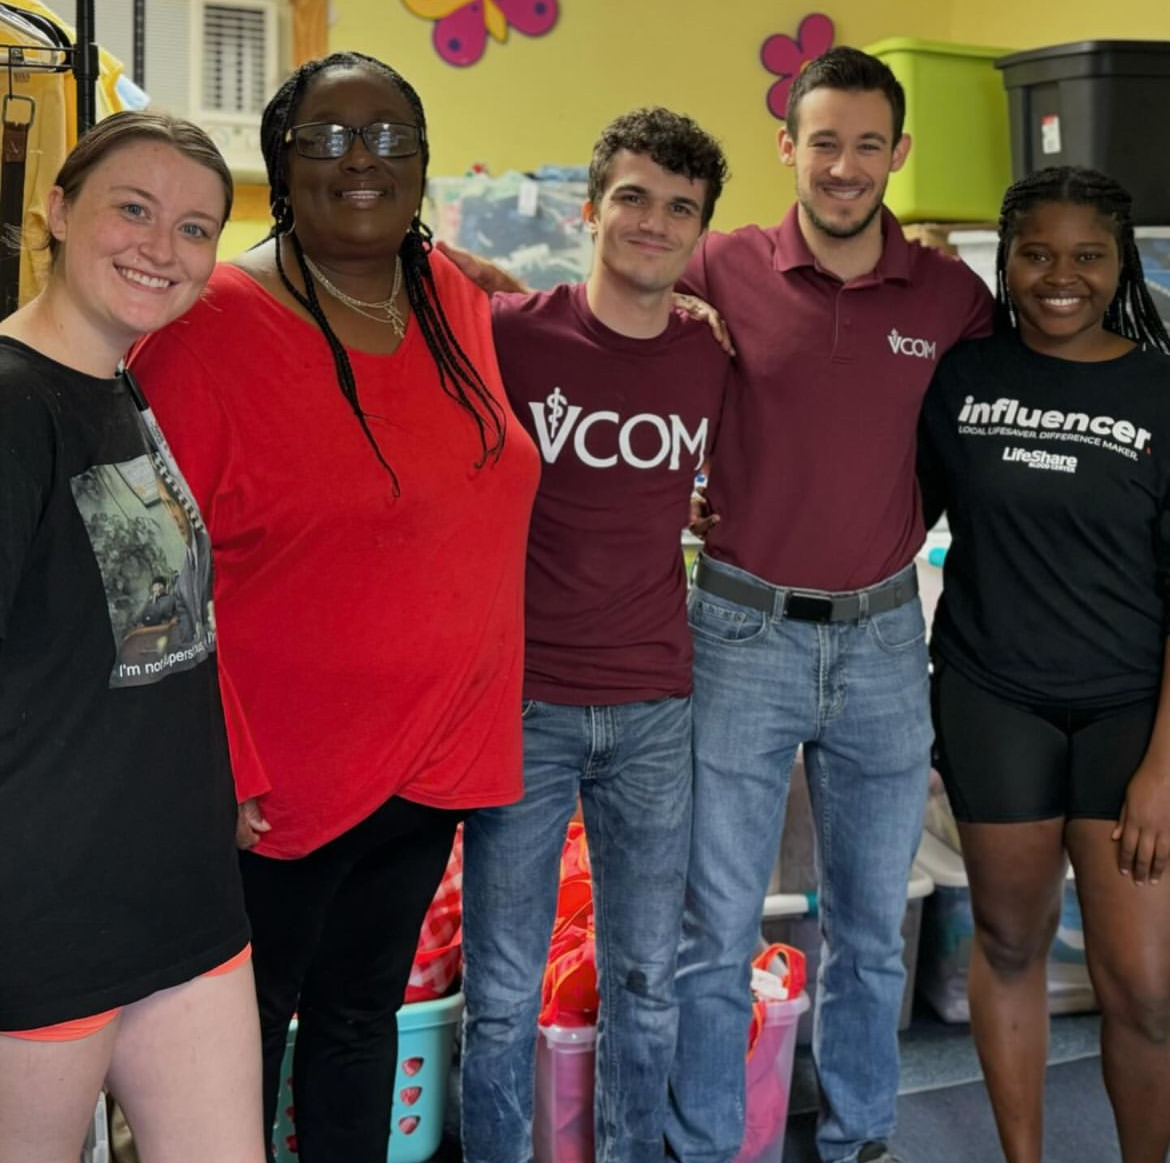 Edward Via College of Osteopathic Medicine-Louisiana spent more than 230 hours of service volunteering at various community organizations. @vcomlouisiana #NOMweek #DOProud